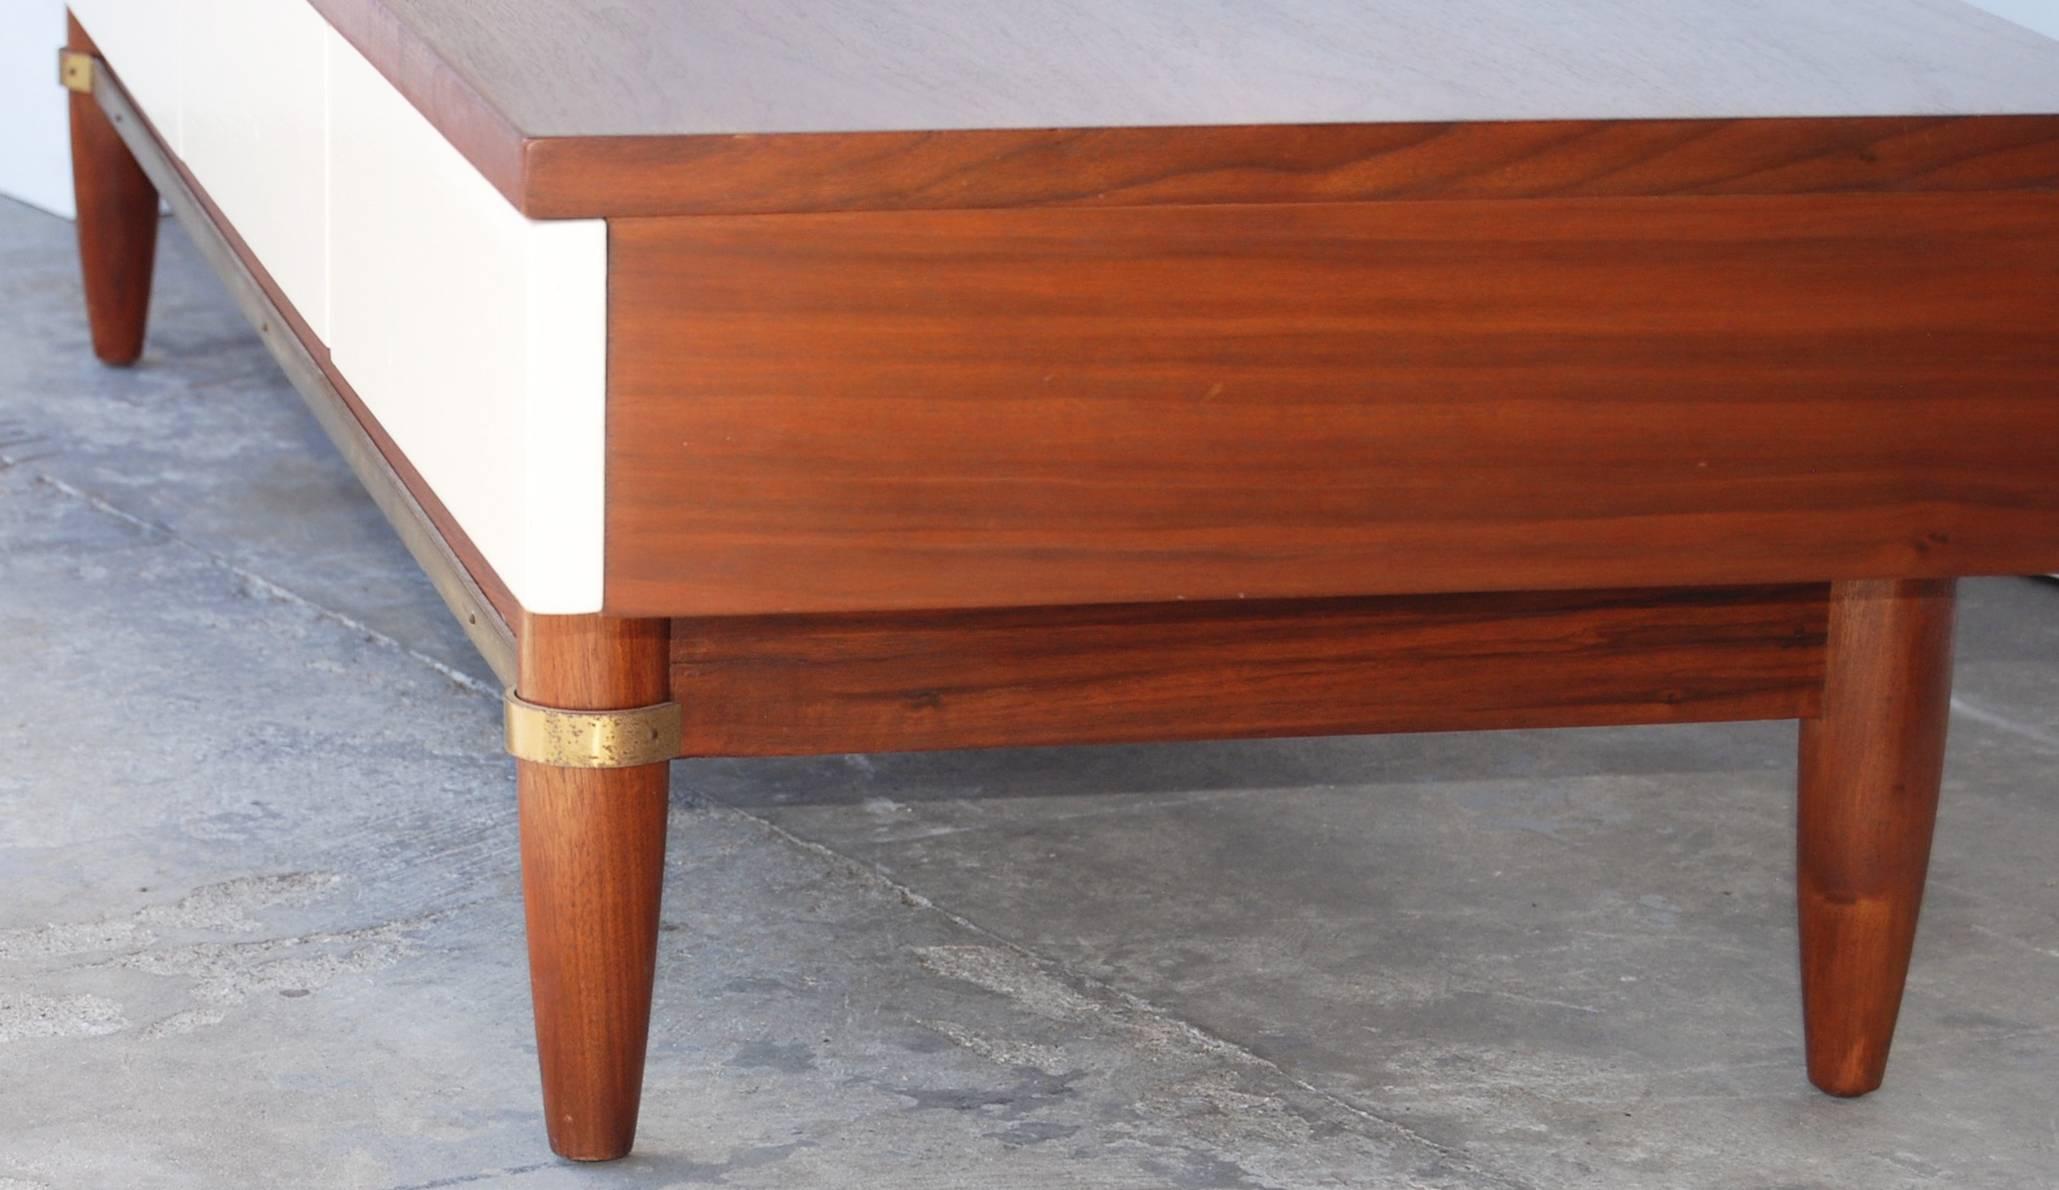 Merton Gershun  bench, part of the Dania collection for American of Martinsville. Drawers across the front are off-white lacquer. Brass stretchers.